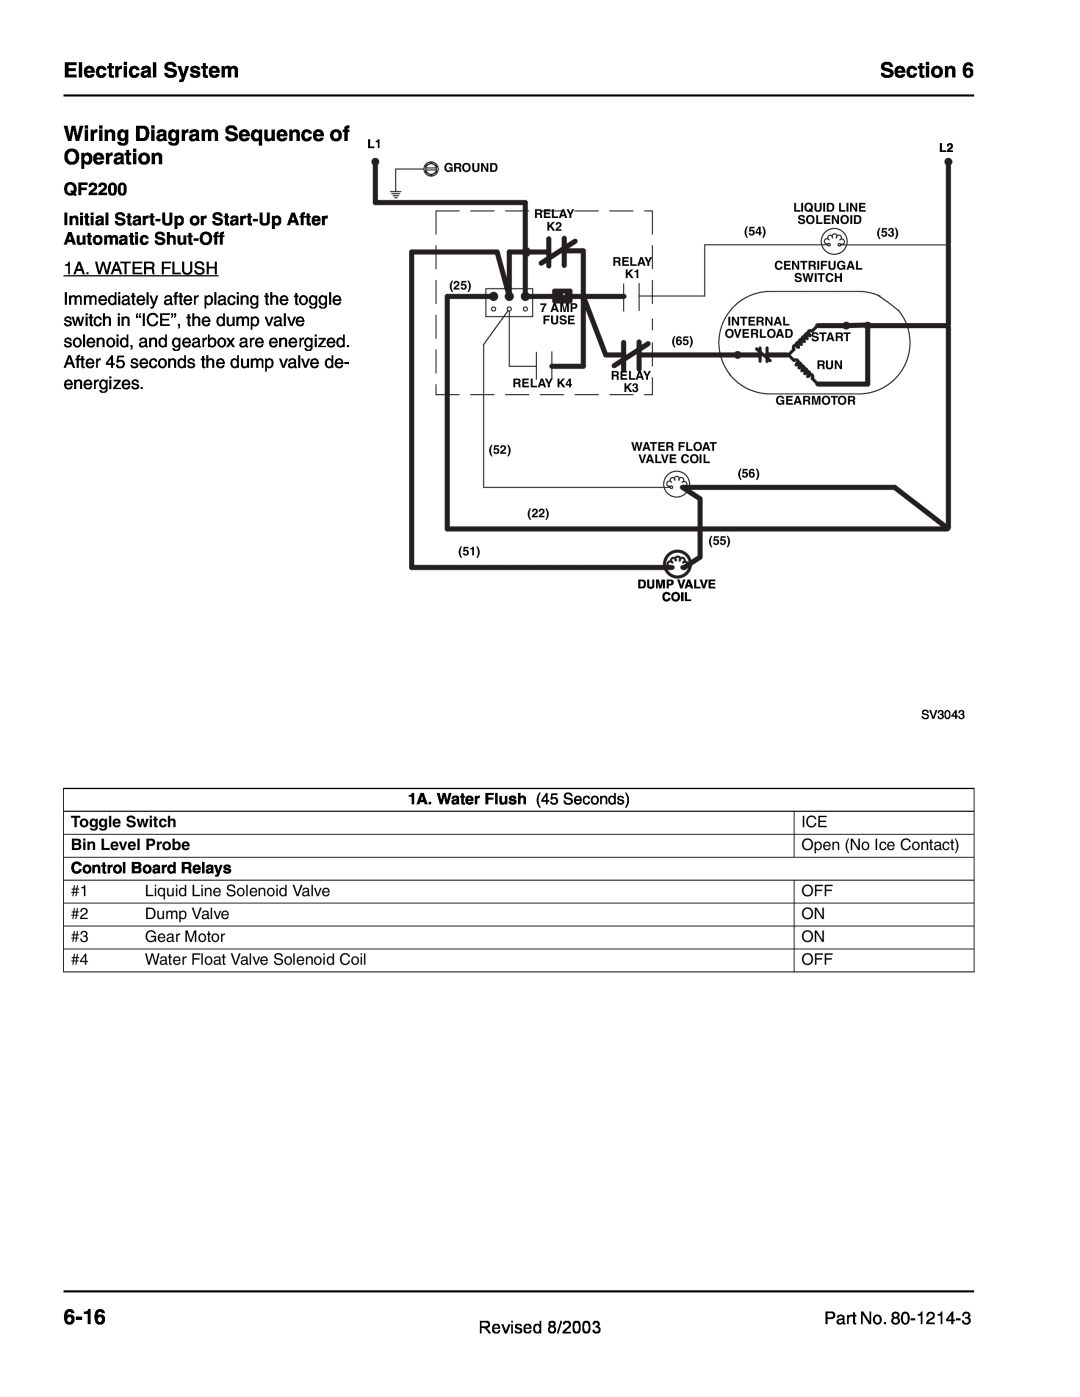 Manitowoc Ice QF0400, QF2300, QF0800 Electrical System, Section, Wiring Diagram Sequence of L1 Operation, 6-16, QF2200 